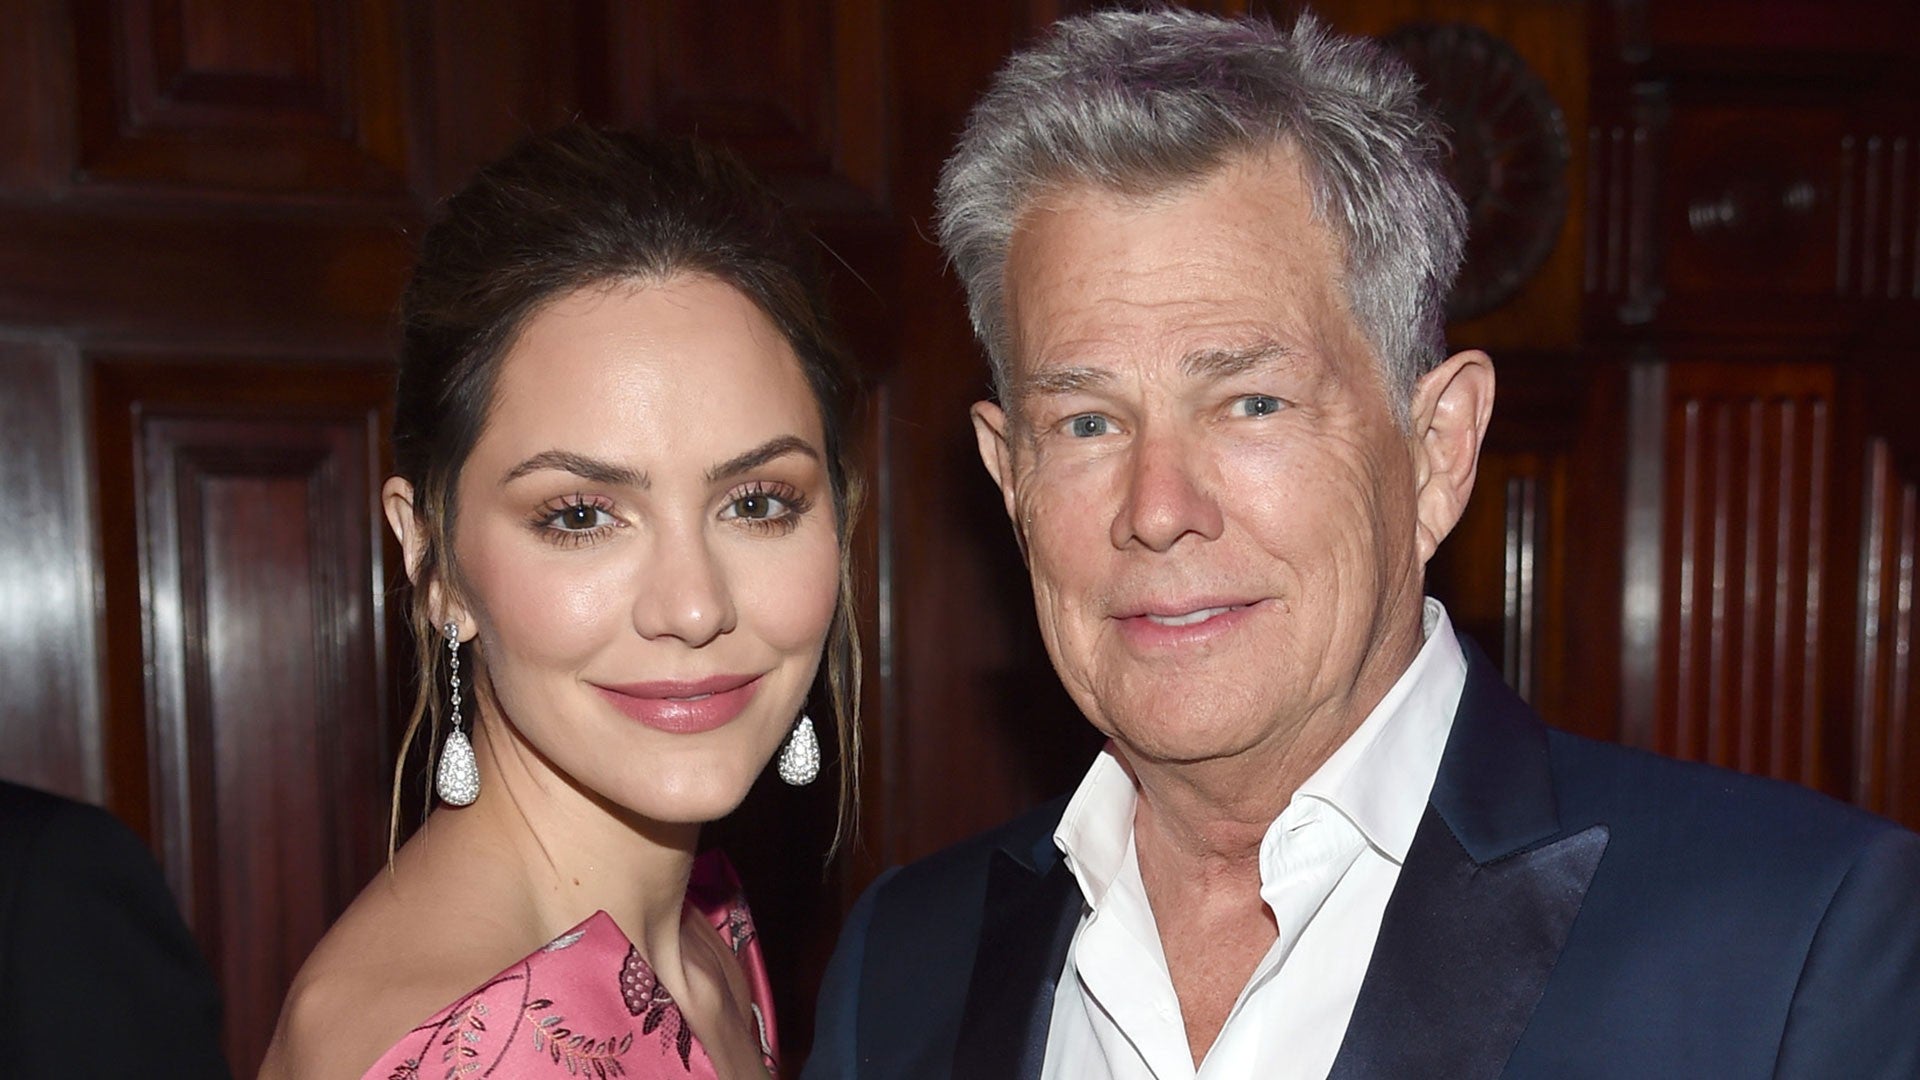 David Foster and Katharine McPhee Are Married | Entertainment Tonight